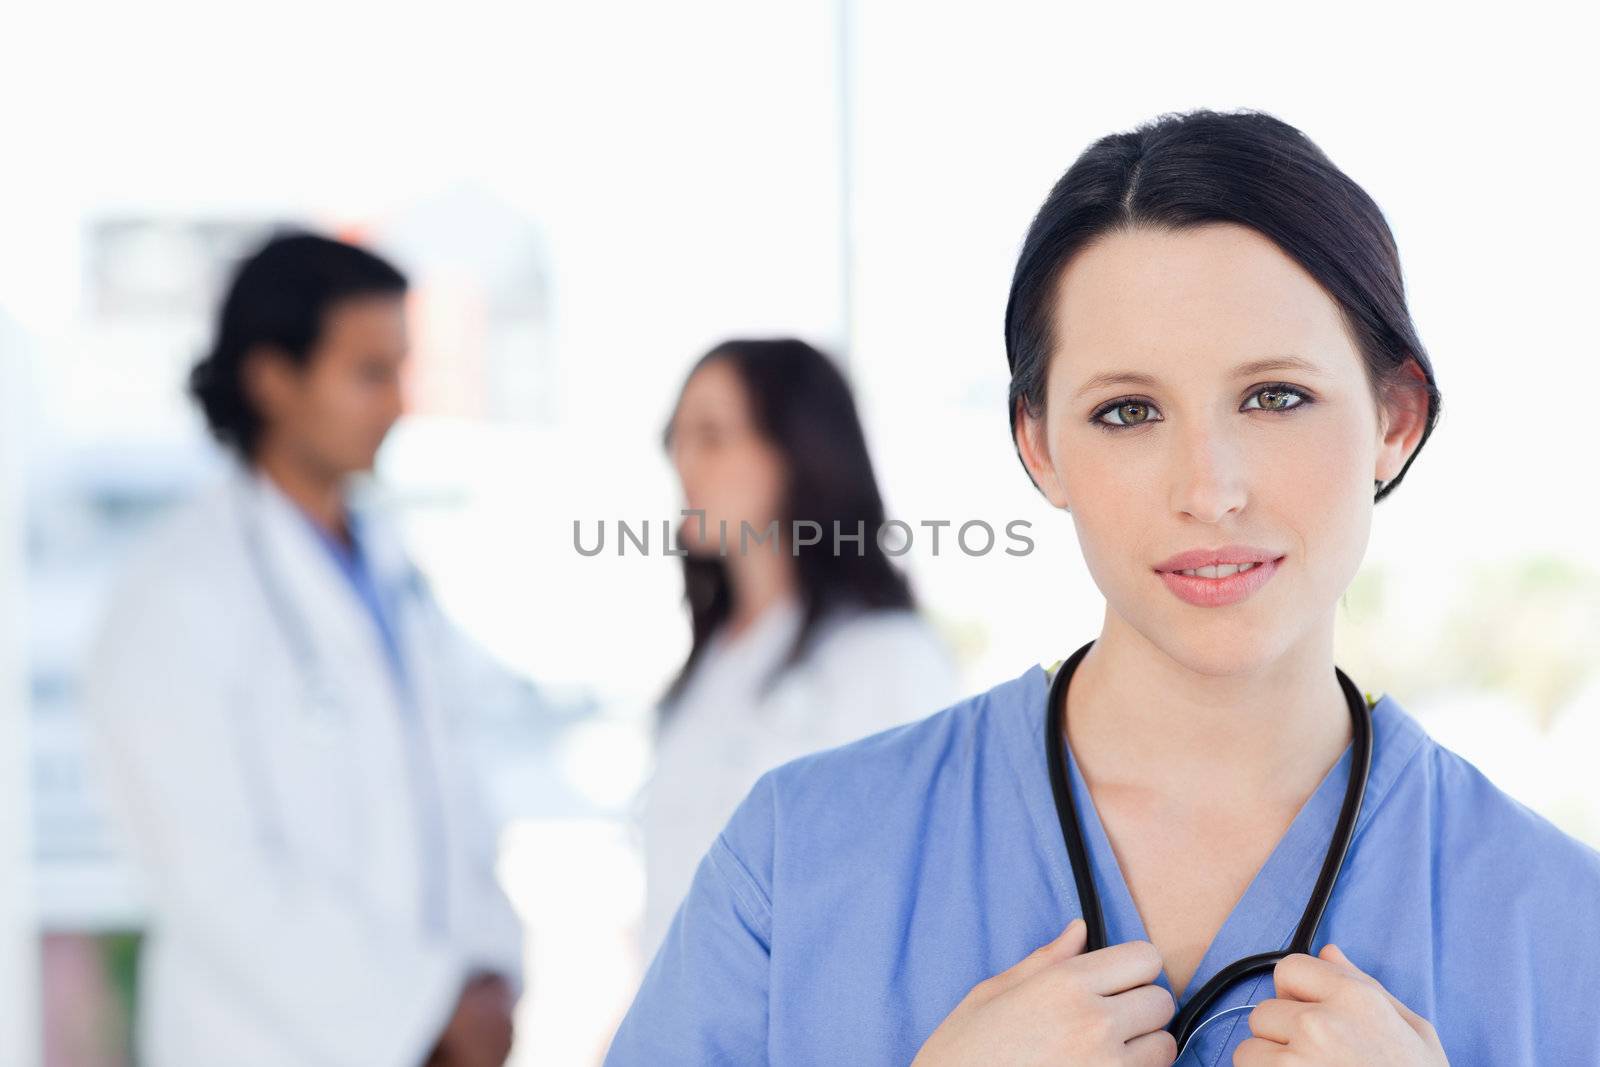 Serious intern looking at the camera while her medical team is in the background